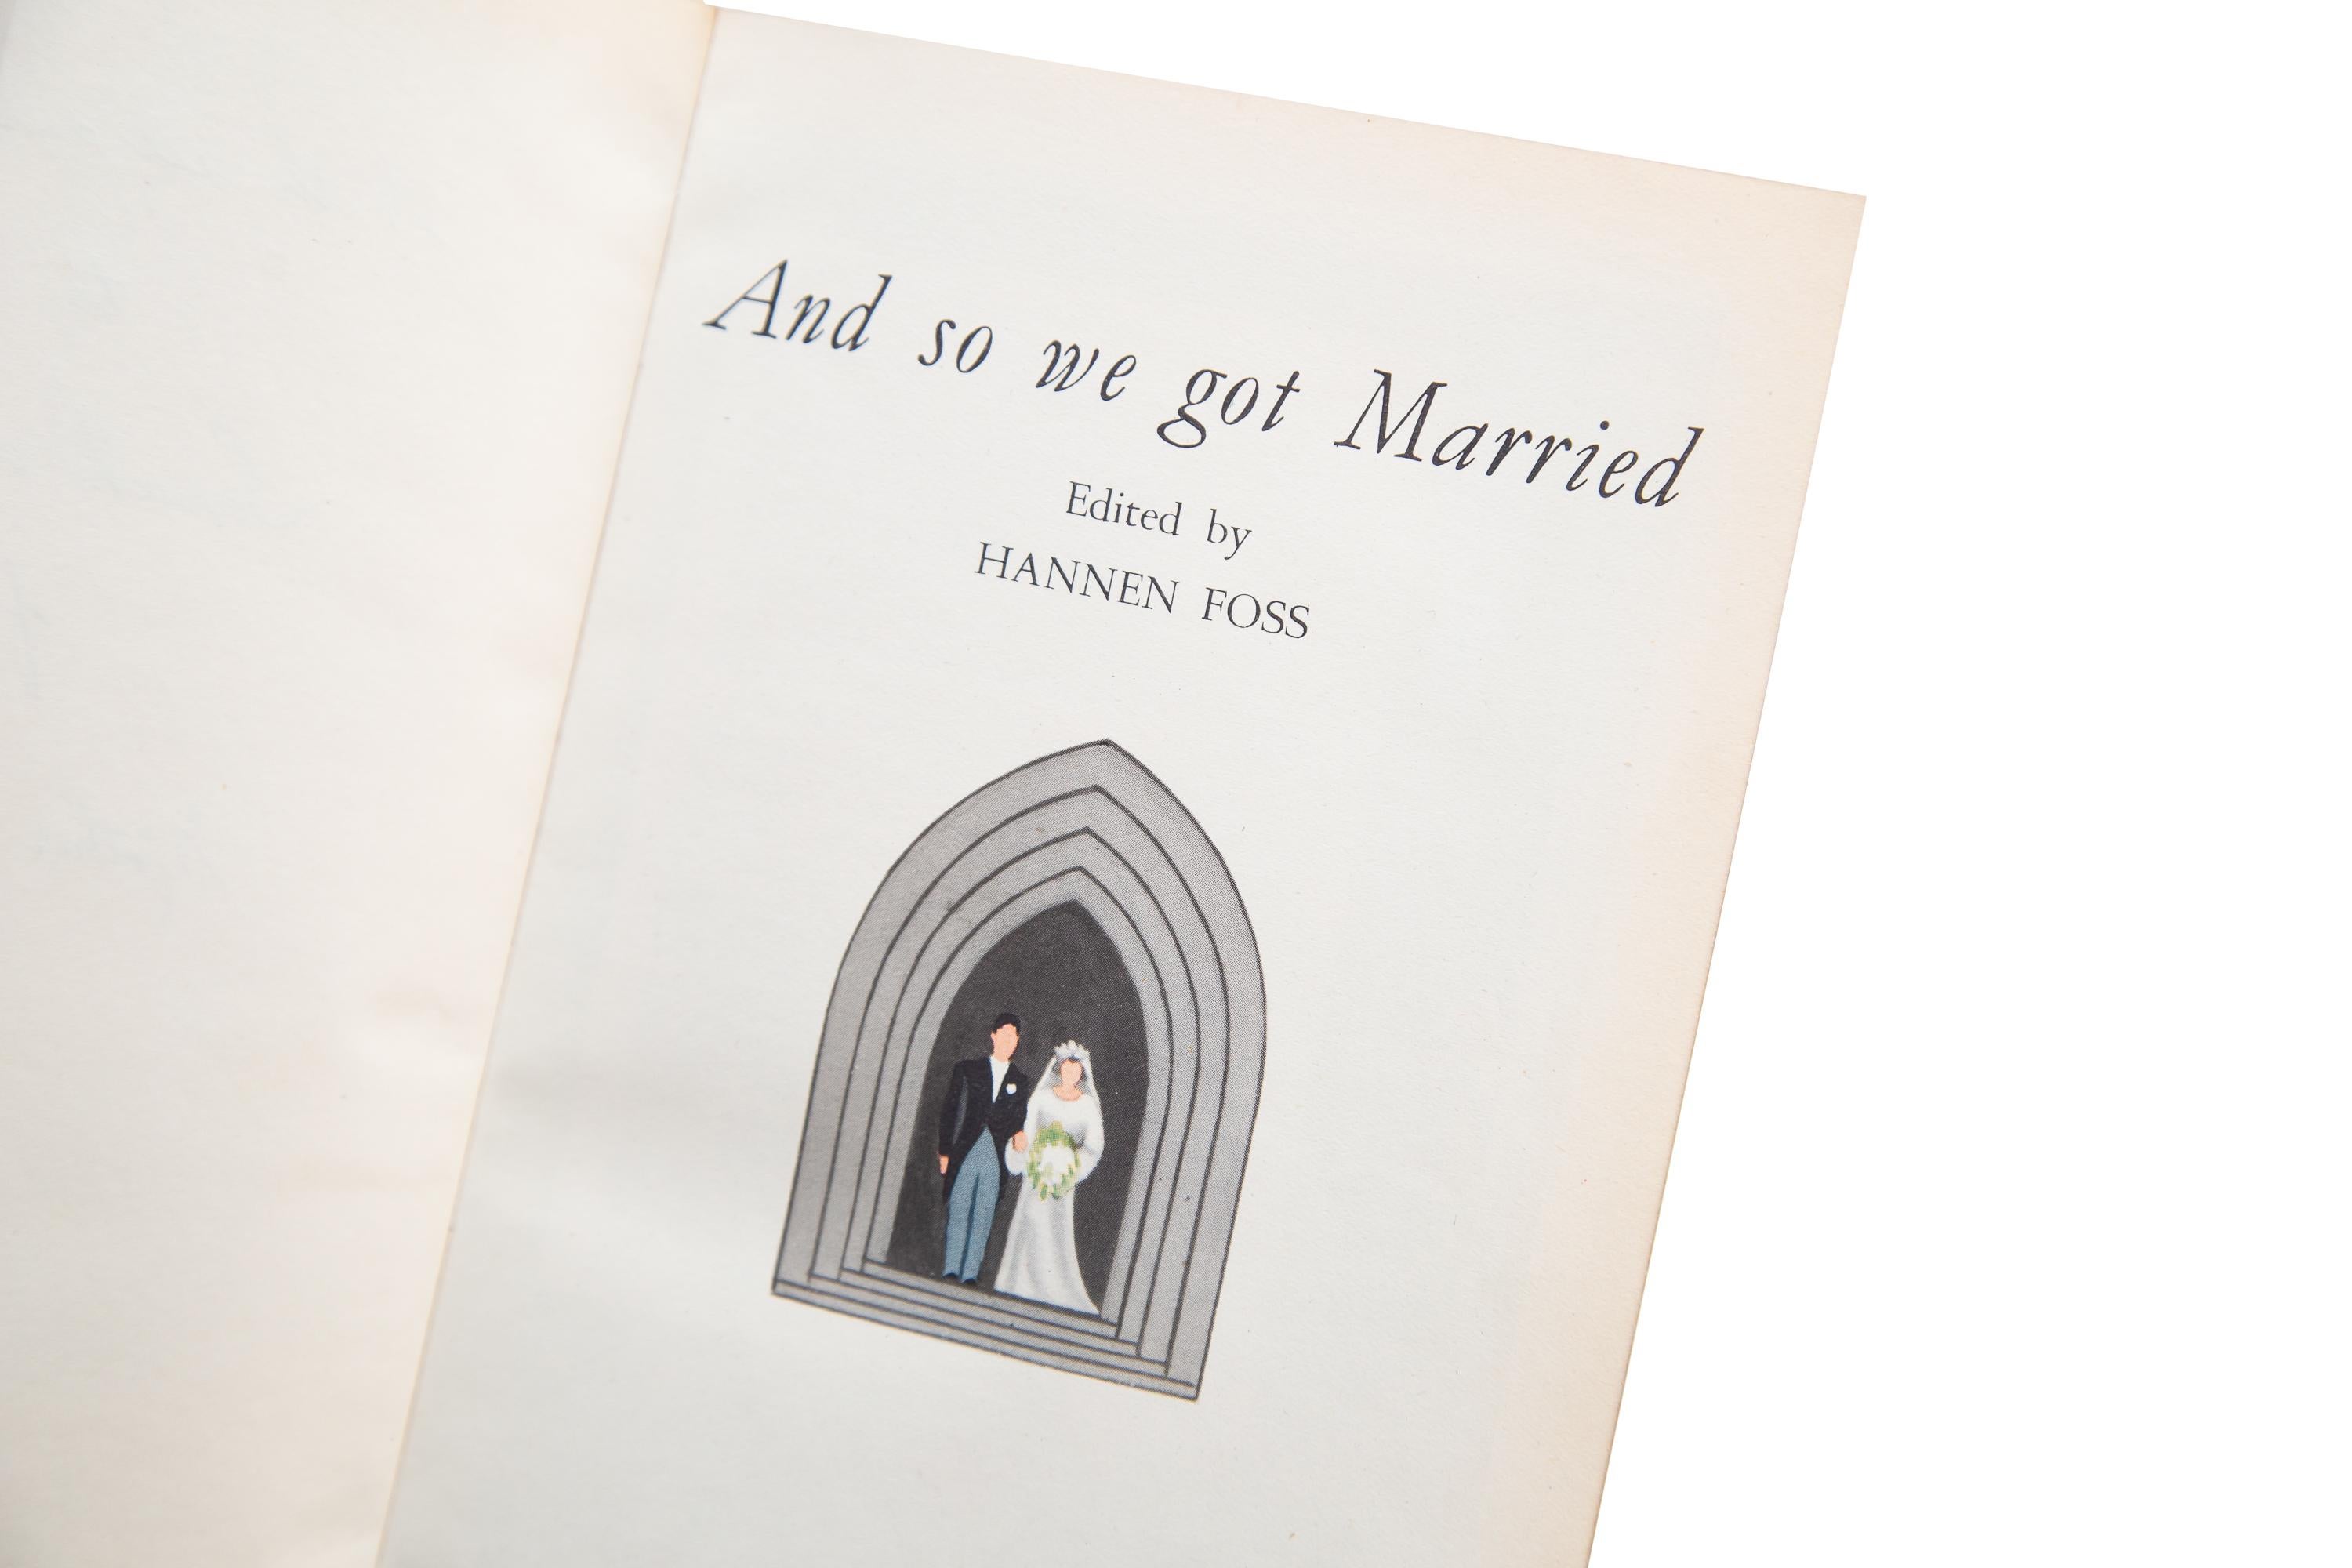 English 1 Volume, Hannen Foss, and So We Got Married For Sale